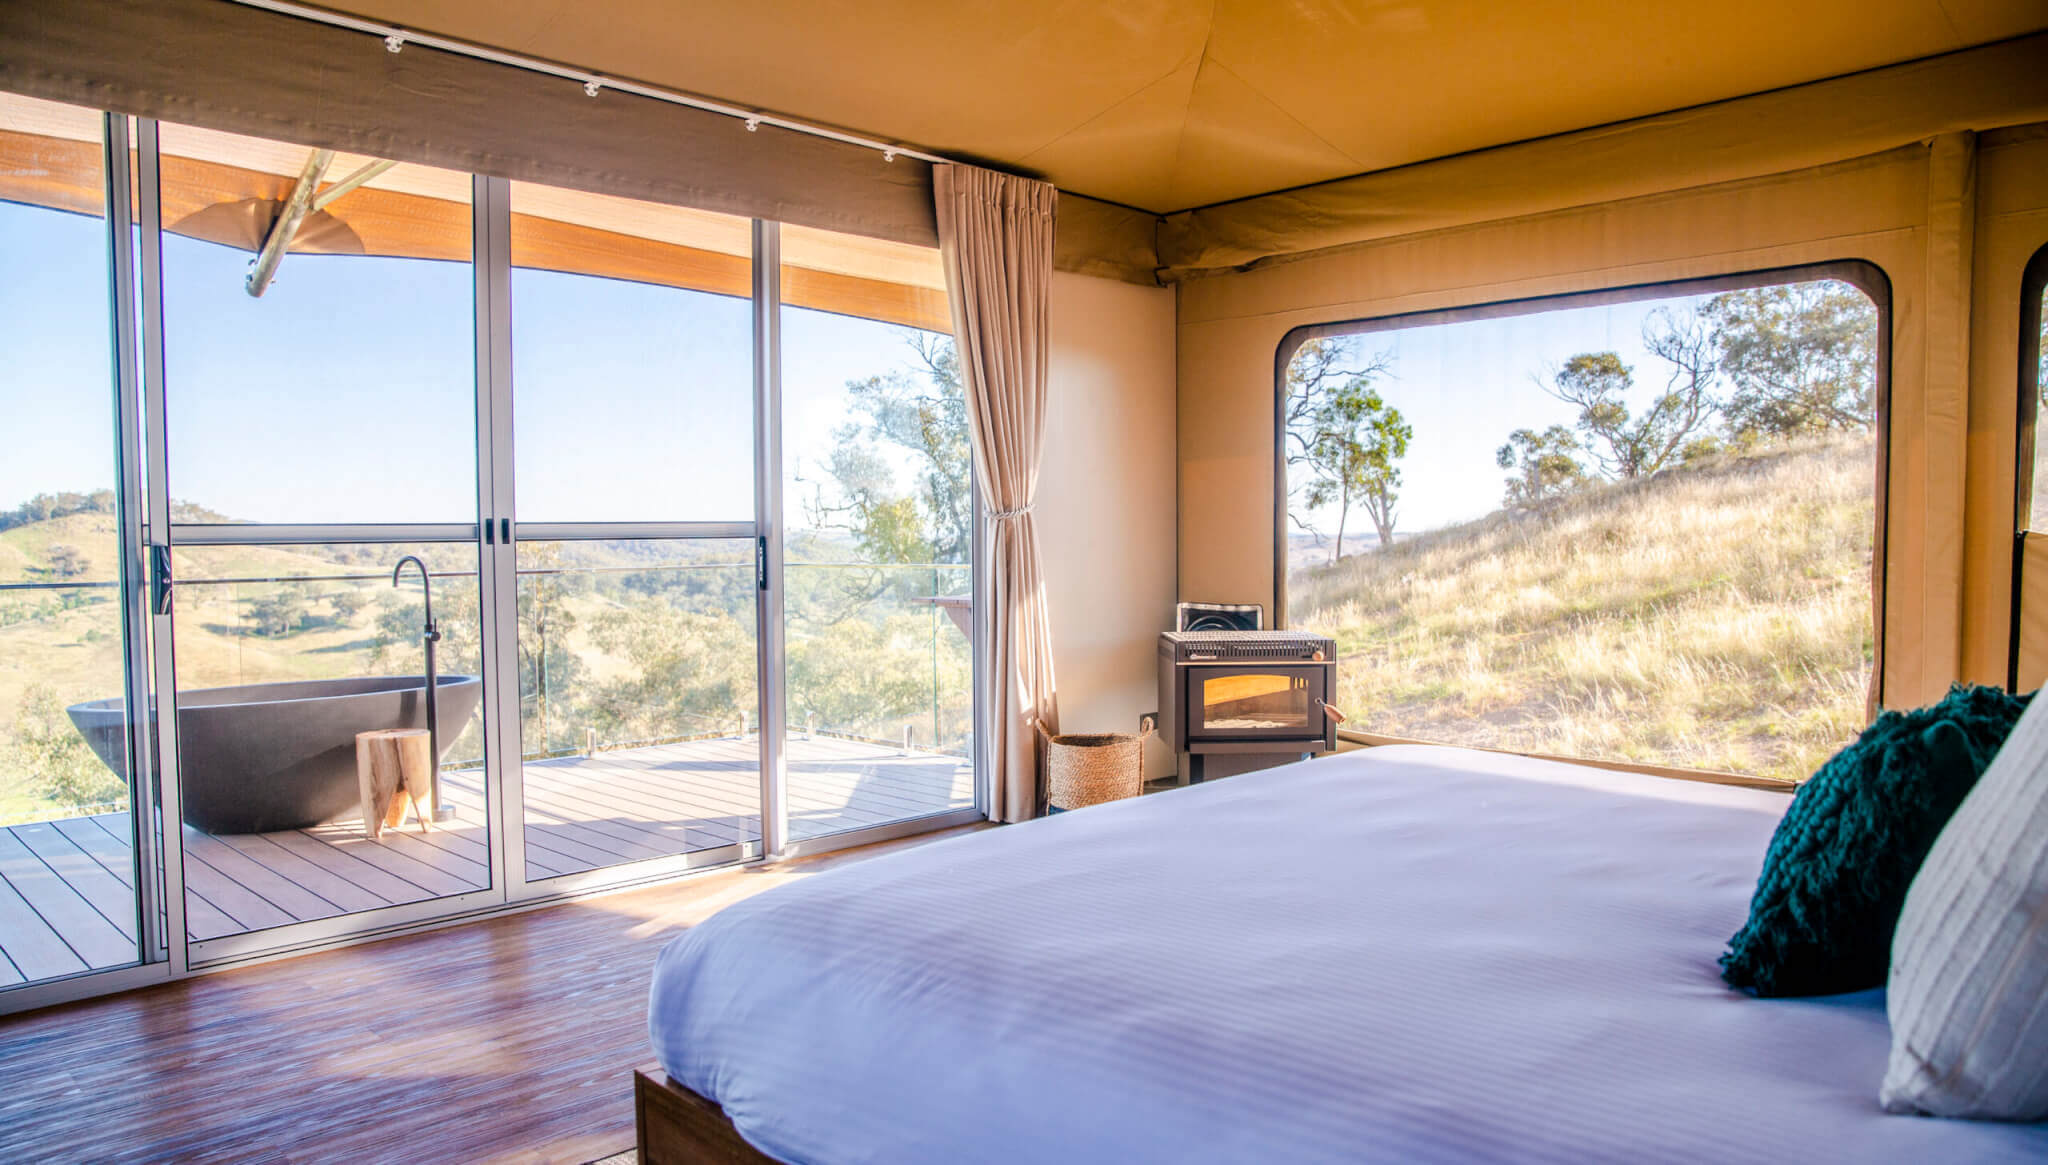 An inside room view of our charming one-of-a-kind hotel in Mudgee NSW. The perfect place for private wine tasting and relaxation.